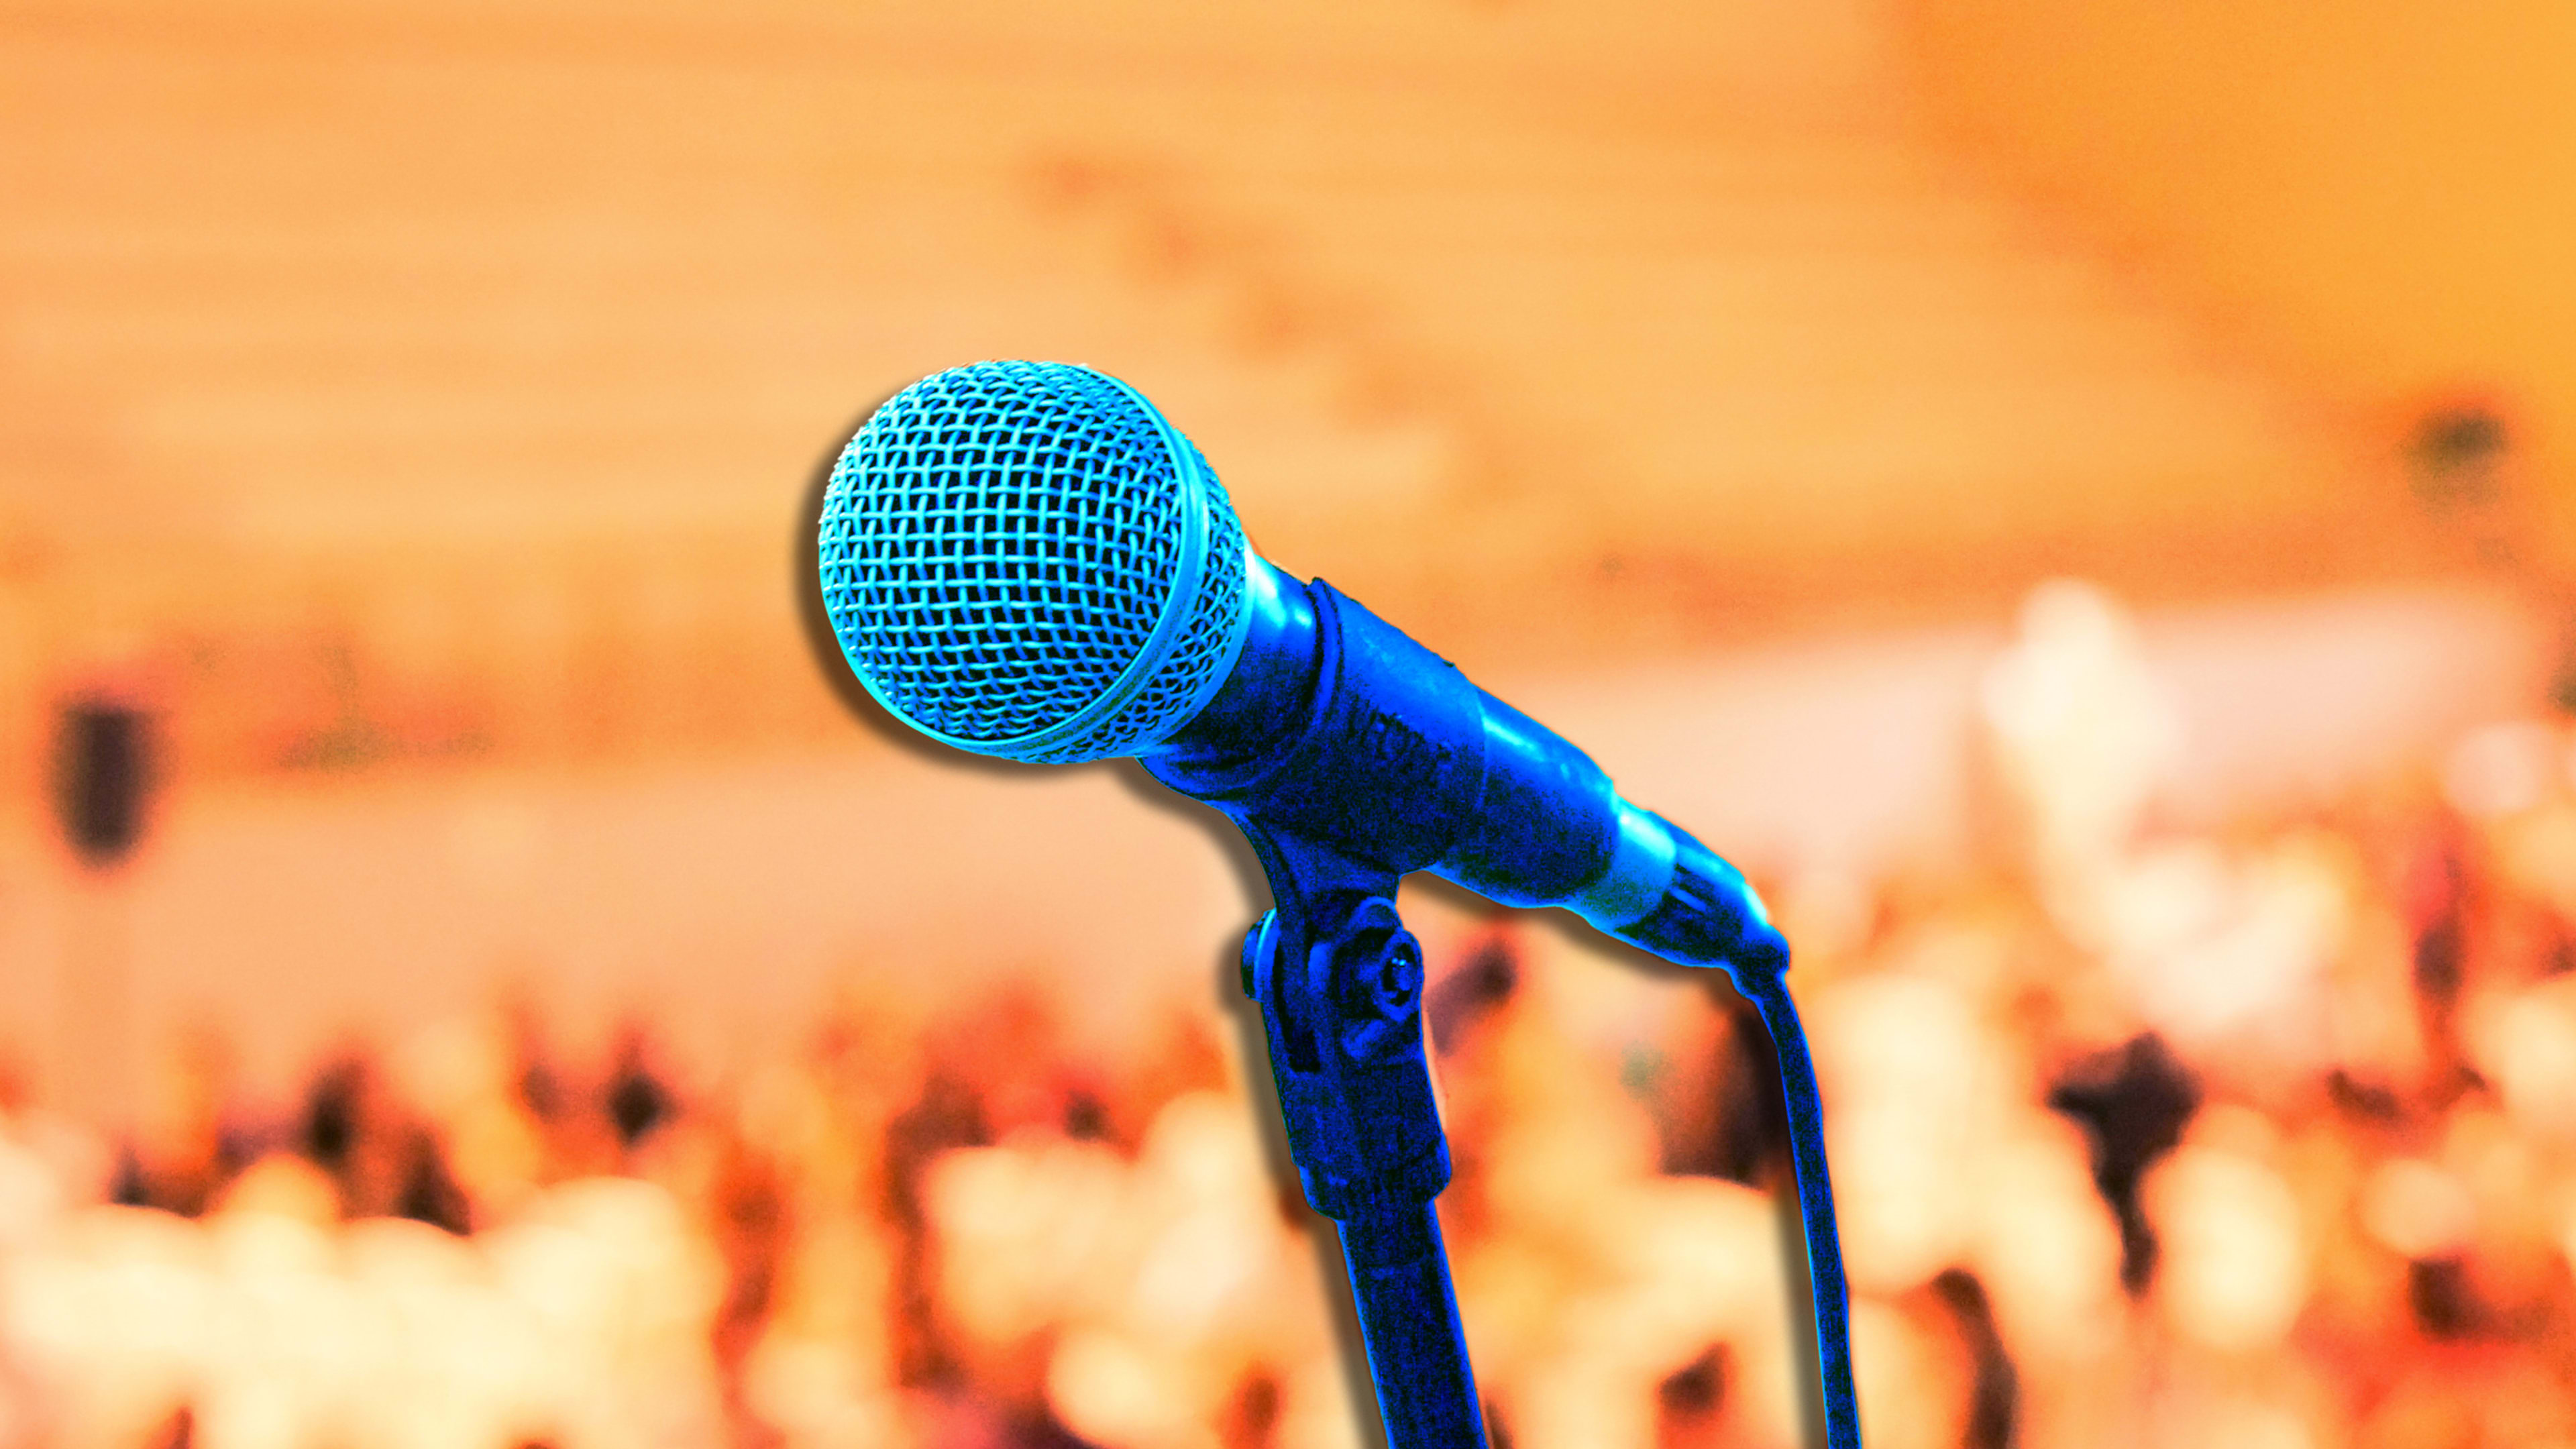 How to manage your anxiety about public speaking